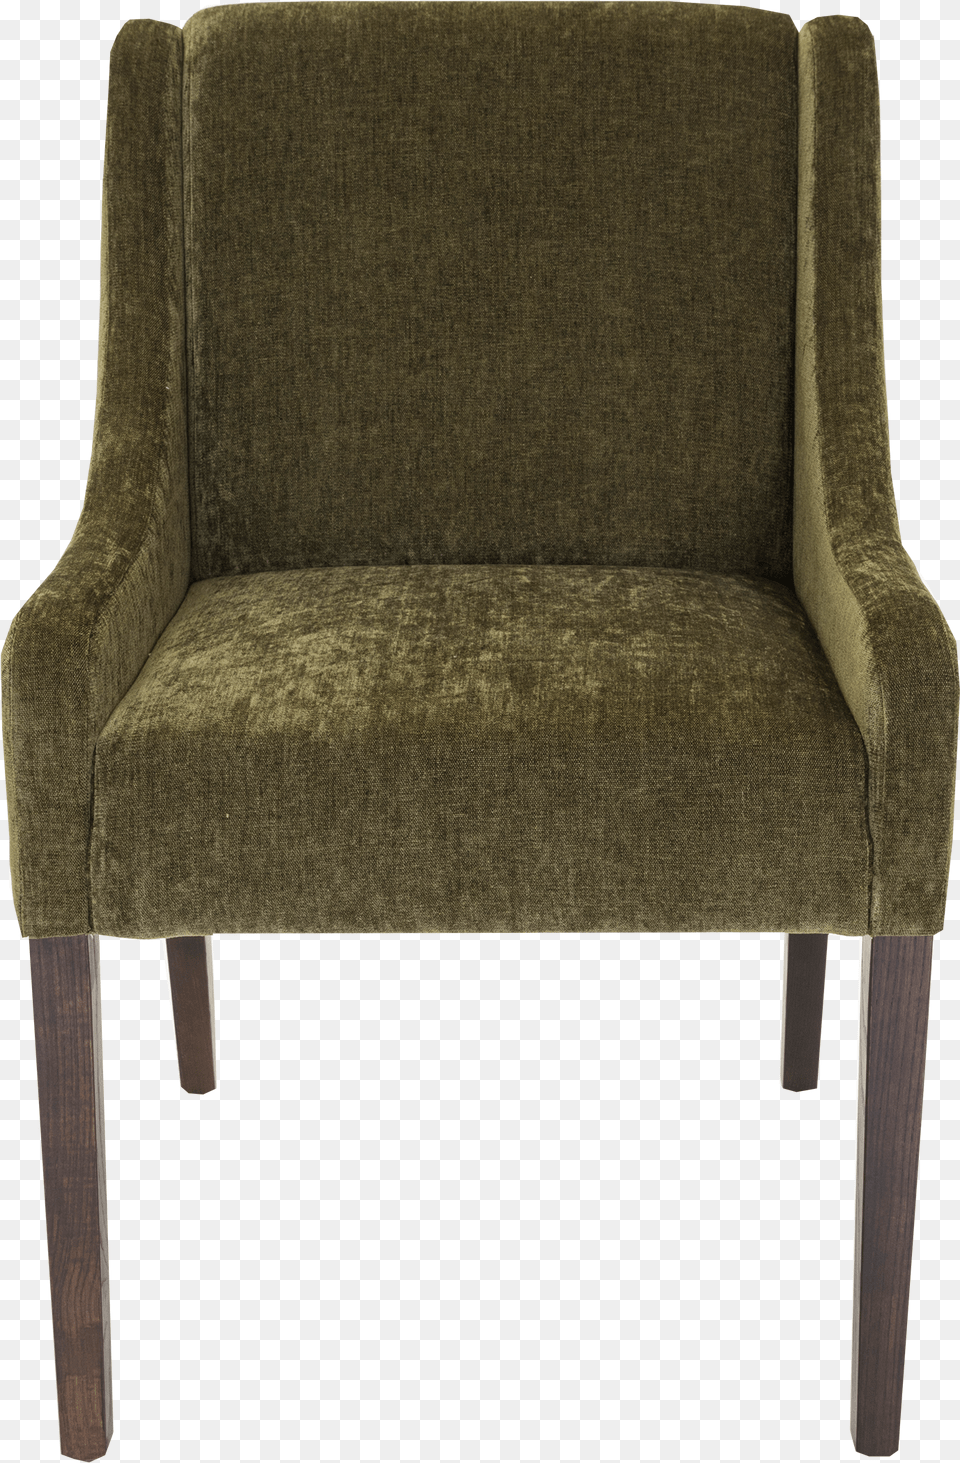 Front View Of Organic Green Luxurious Upholstered Chair Chair, Furniture, Armchair Png Image